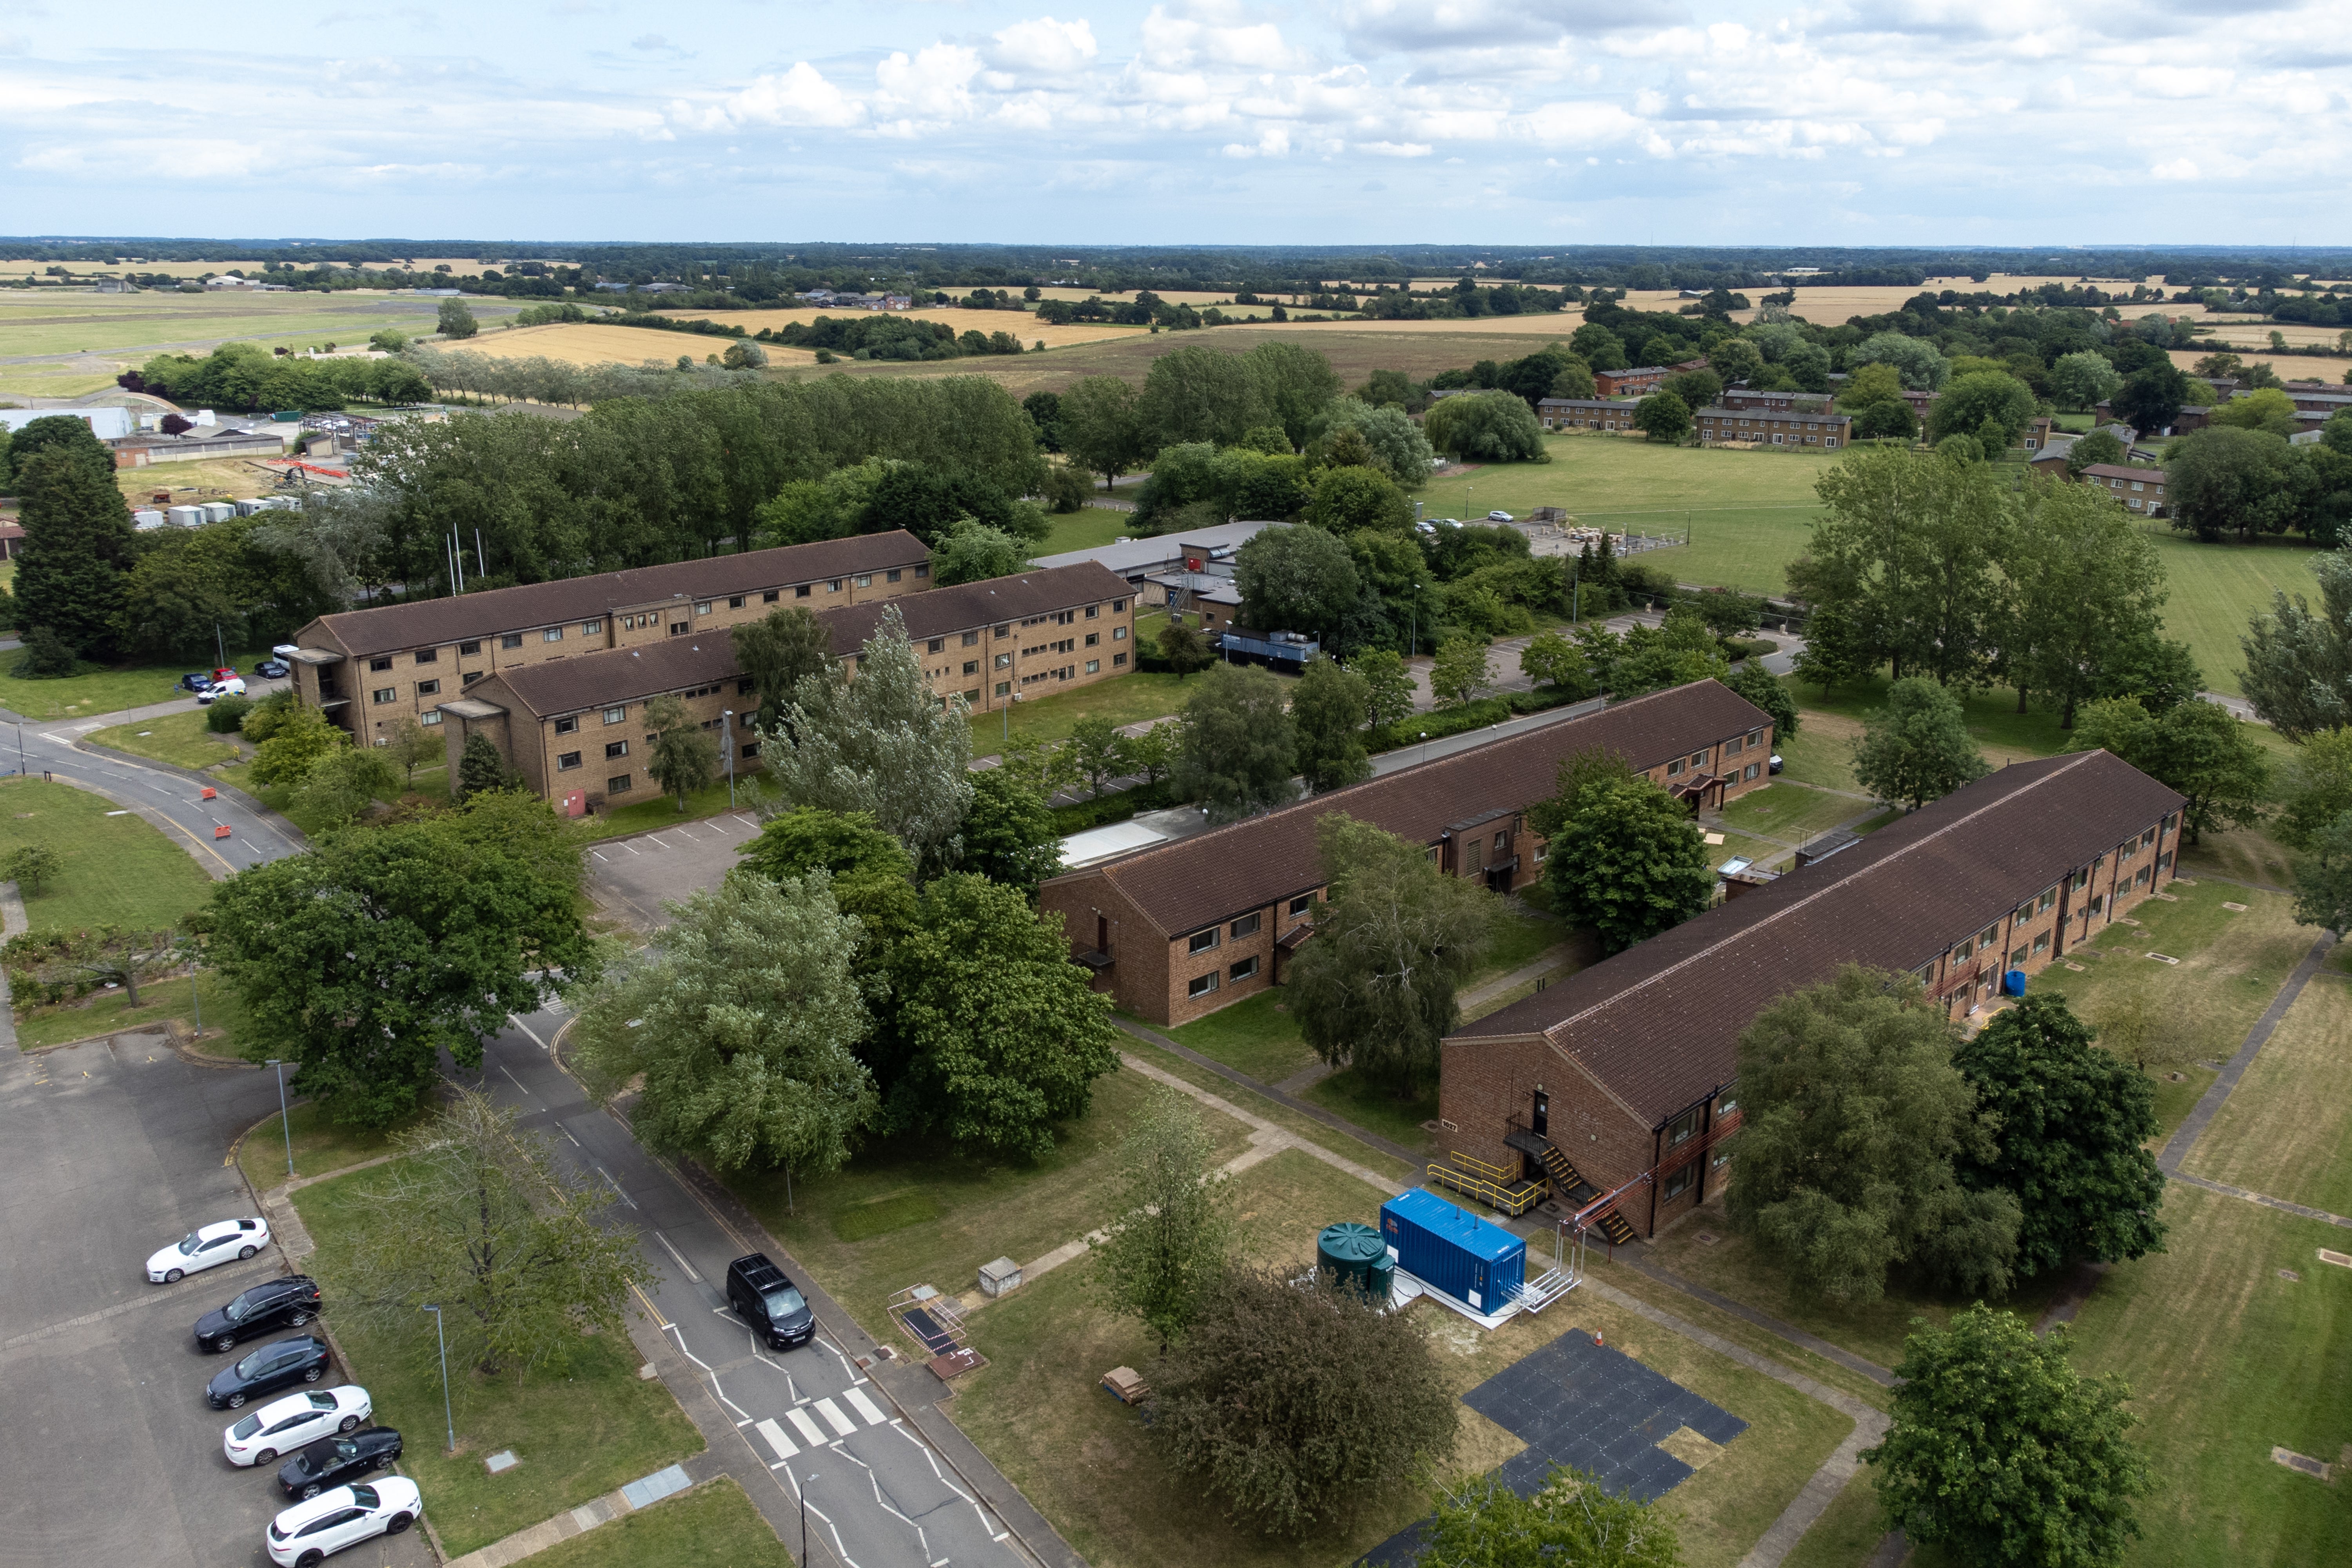 An aerial view of the asylum accommodation centre at MDP Wethersfield in Essex, a 335-hectare airfield owned by the Ministry of Defence, where the Home Office has begun to house adult male migrants